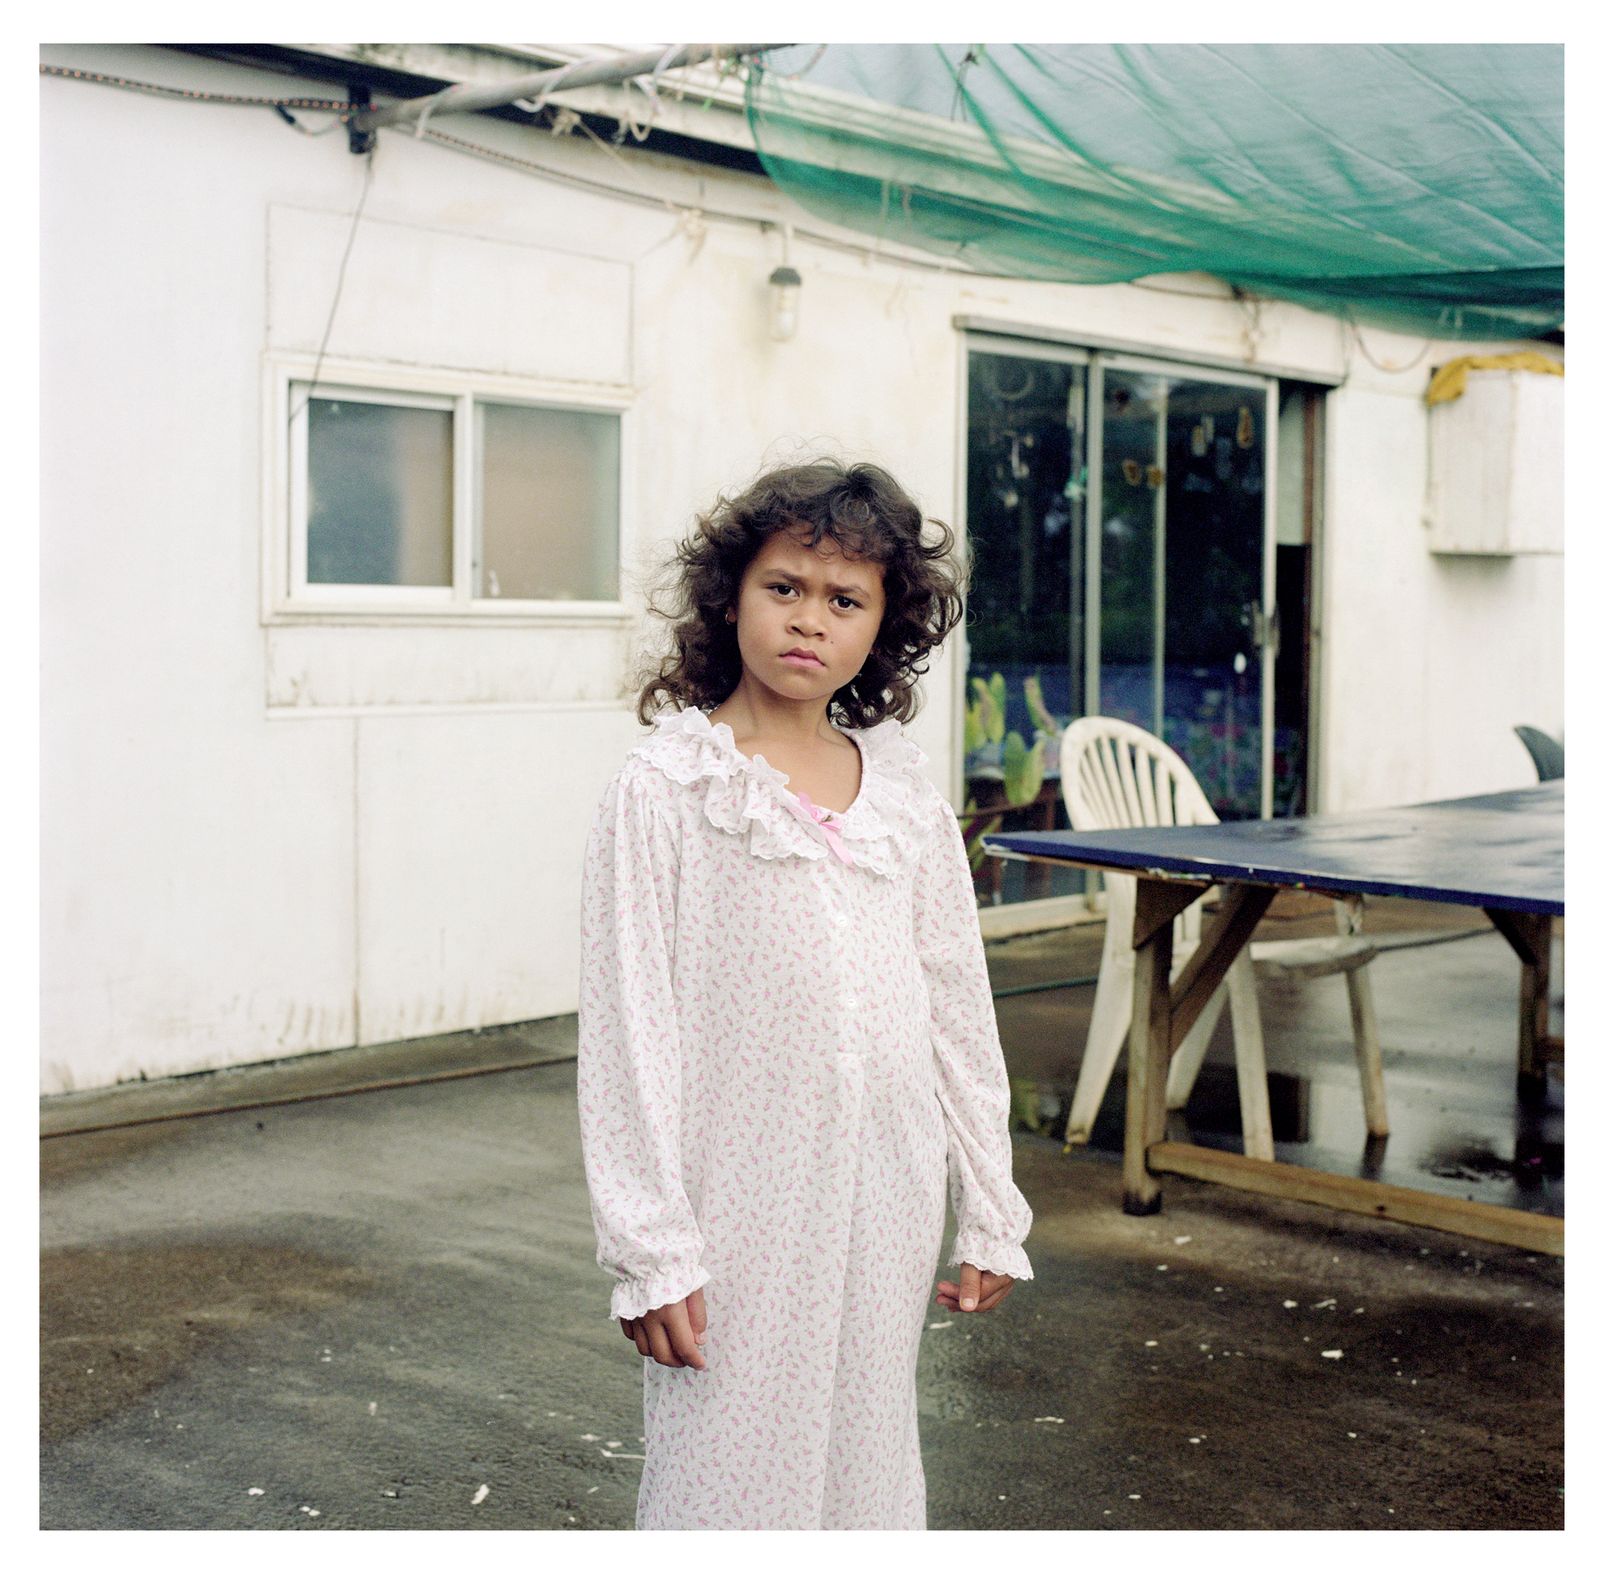 © Rhiannon Adam - Image from the Big Fence, a portrait of pitcairn island photography project